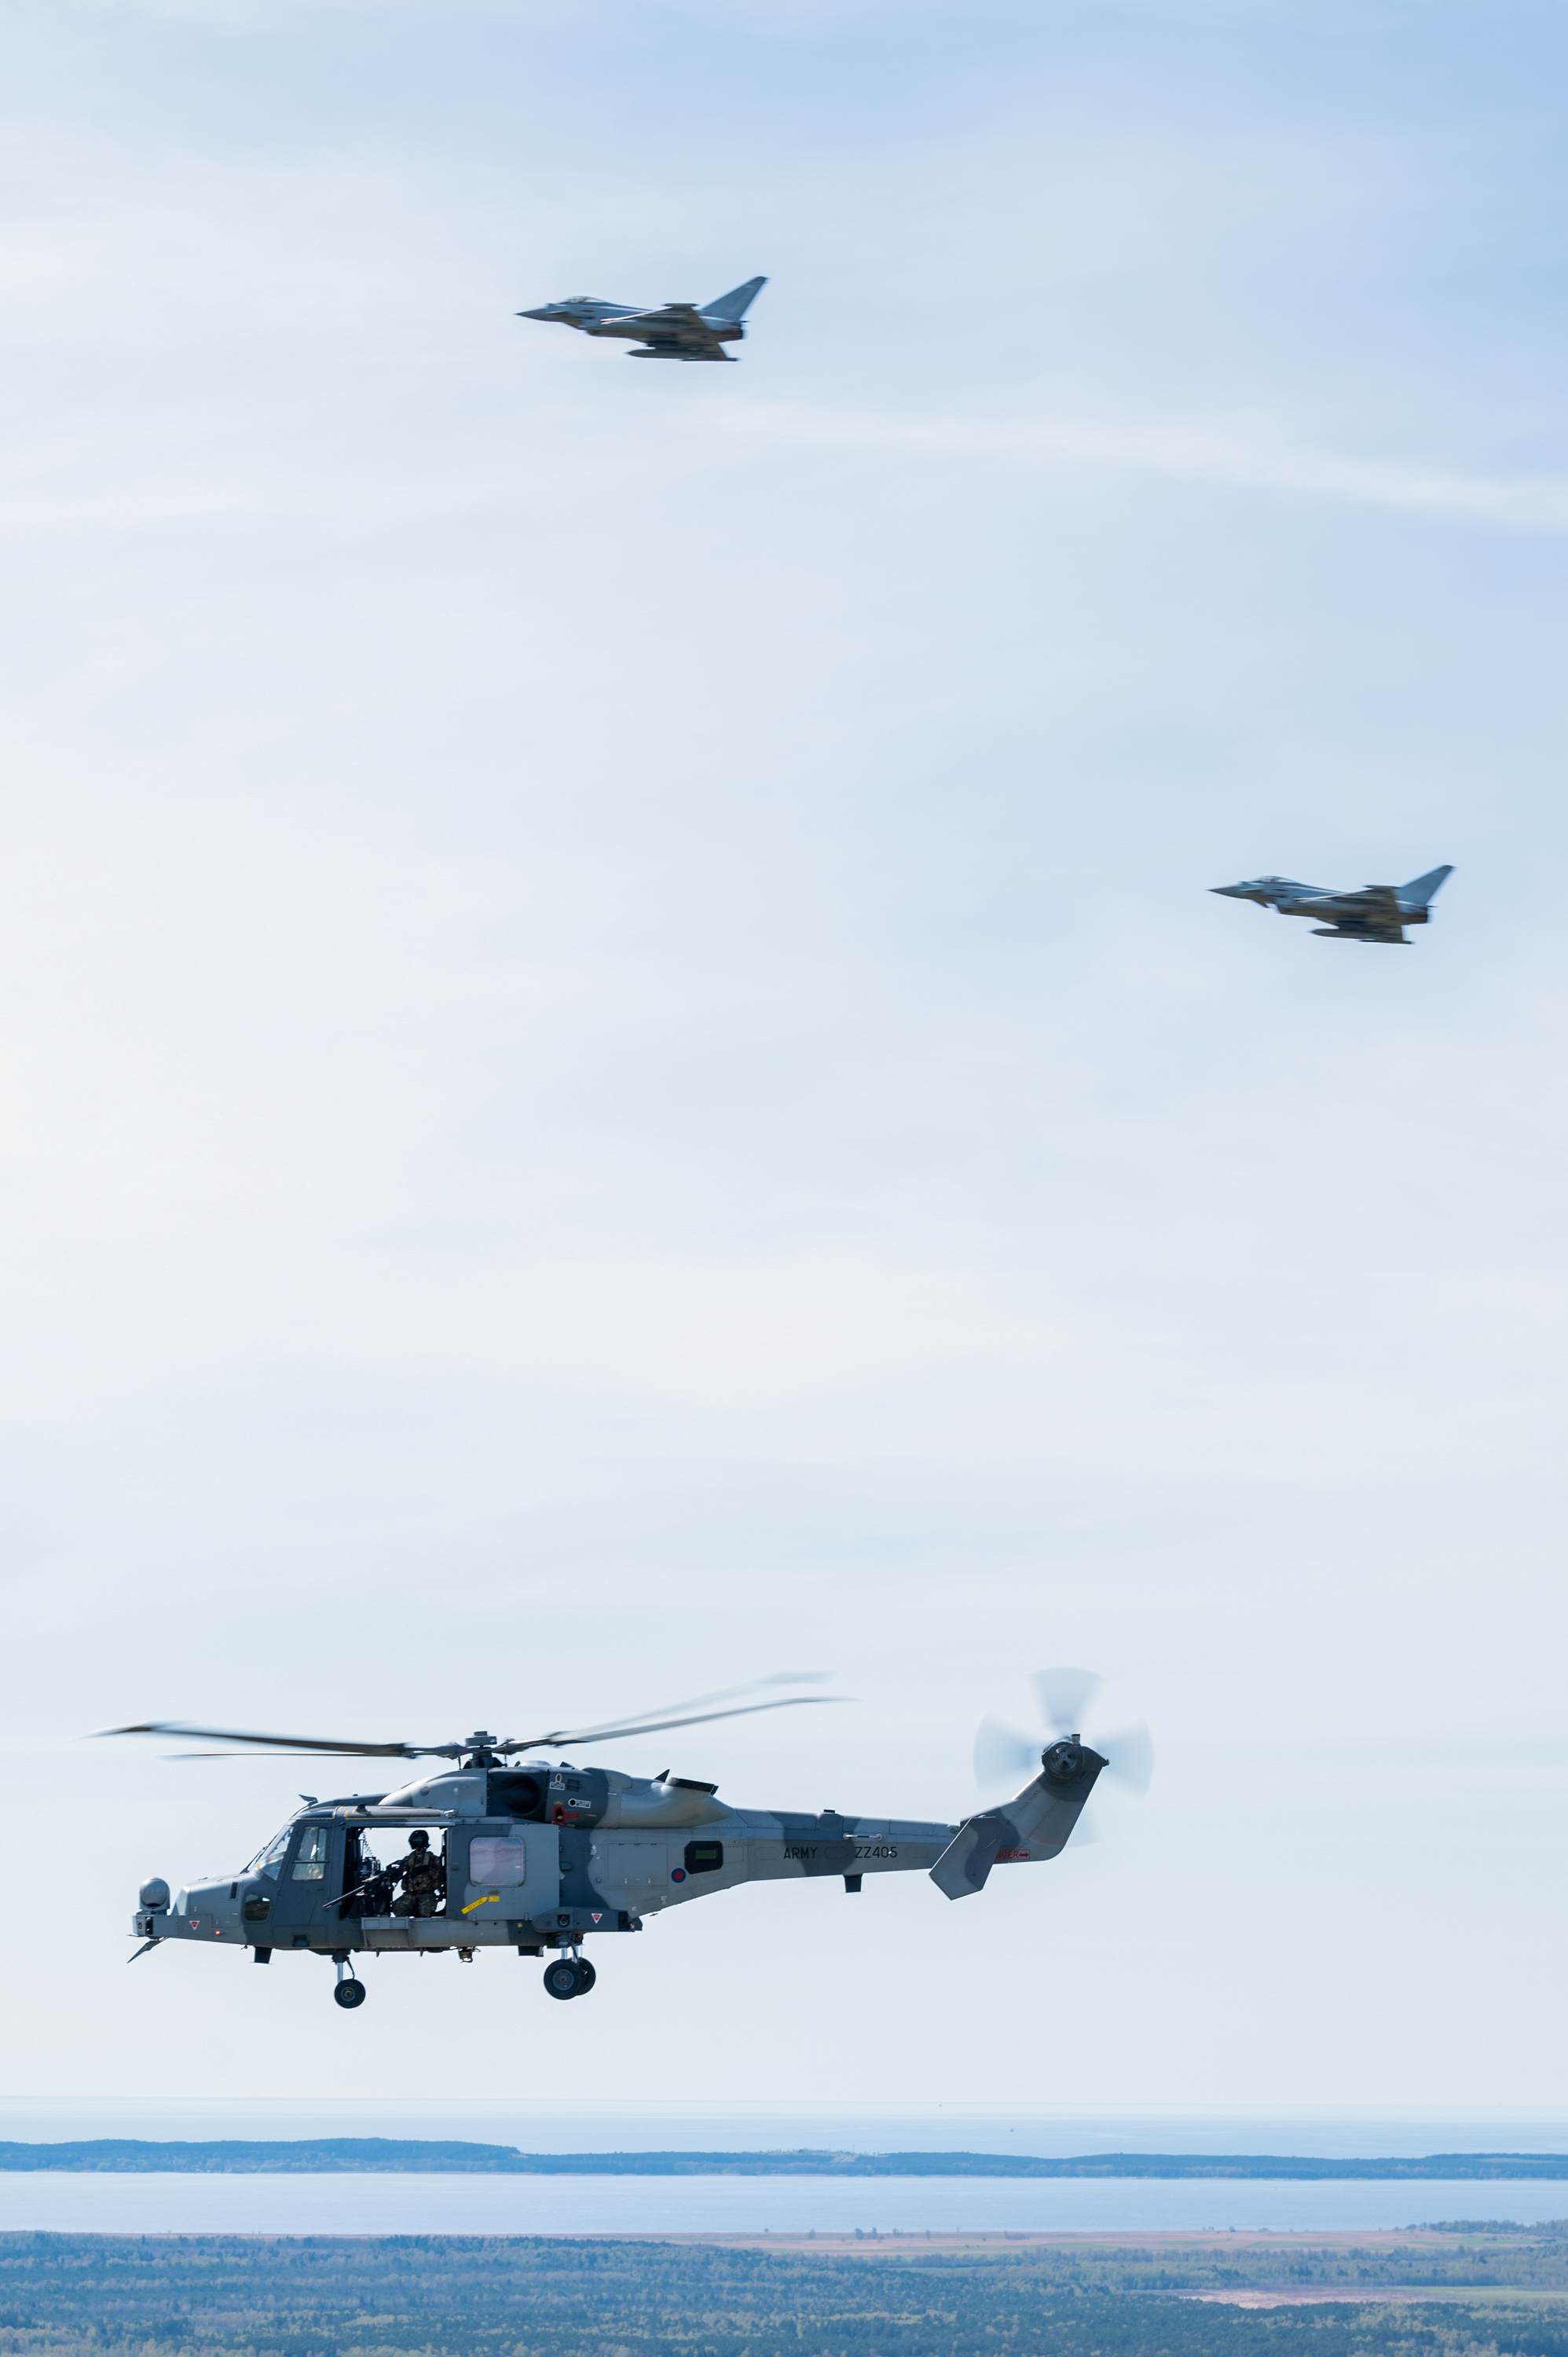 Two RAF Typhoons and a British Army Wildcat helicopter in flight.